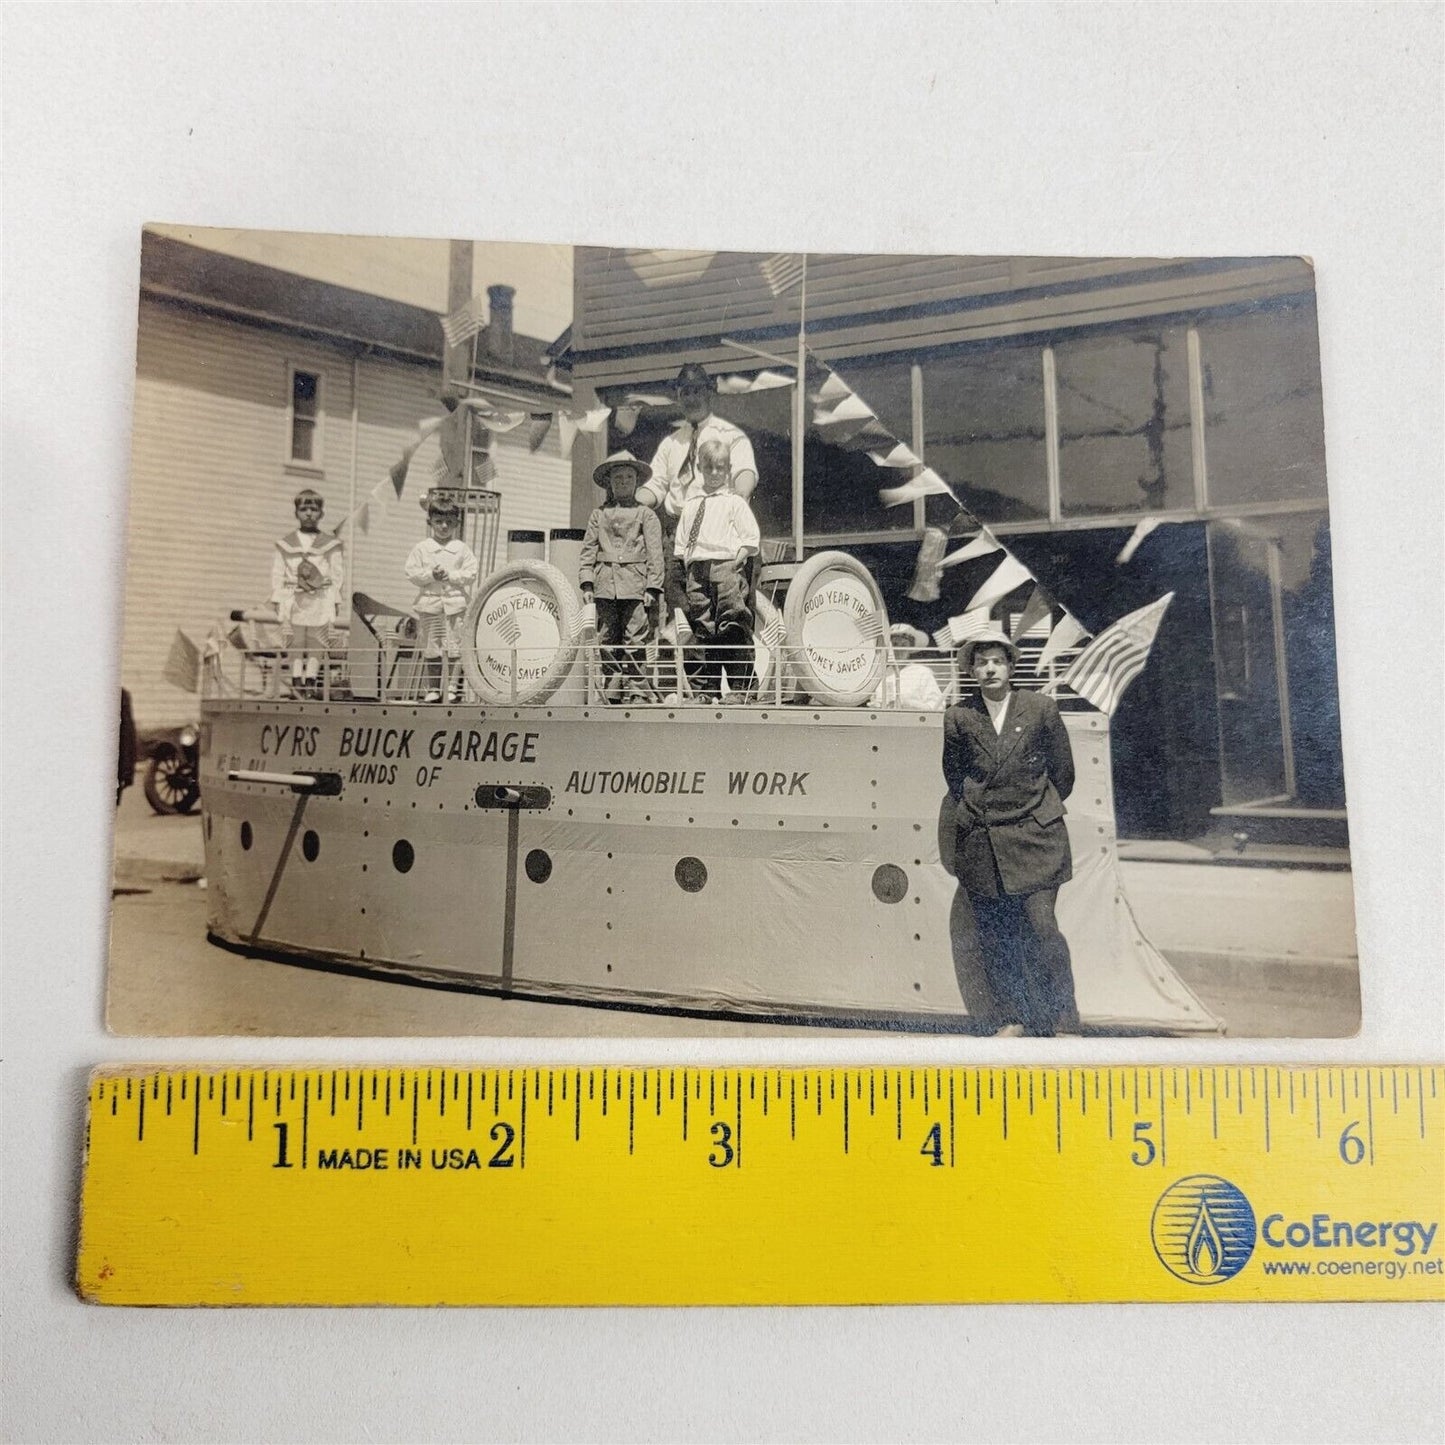 Vintage Photo 1916 Float Parade Cyr's Buick Garage Goodyear Tires Ship Boat 4x6